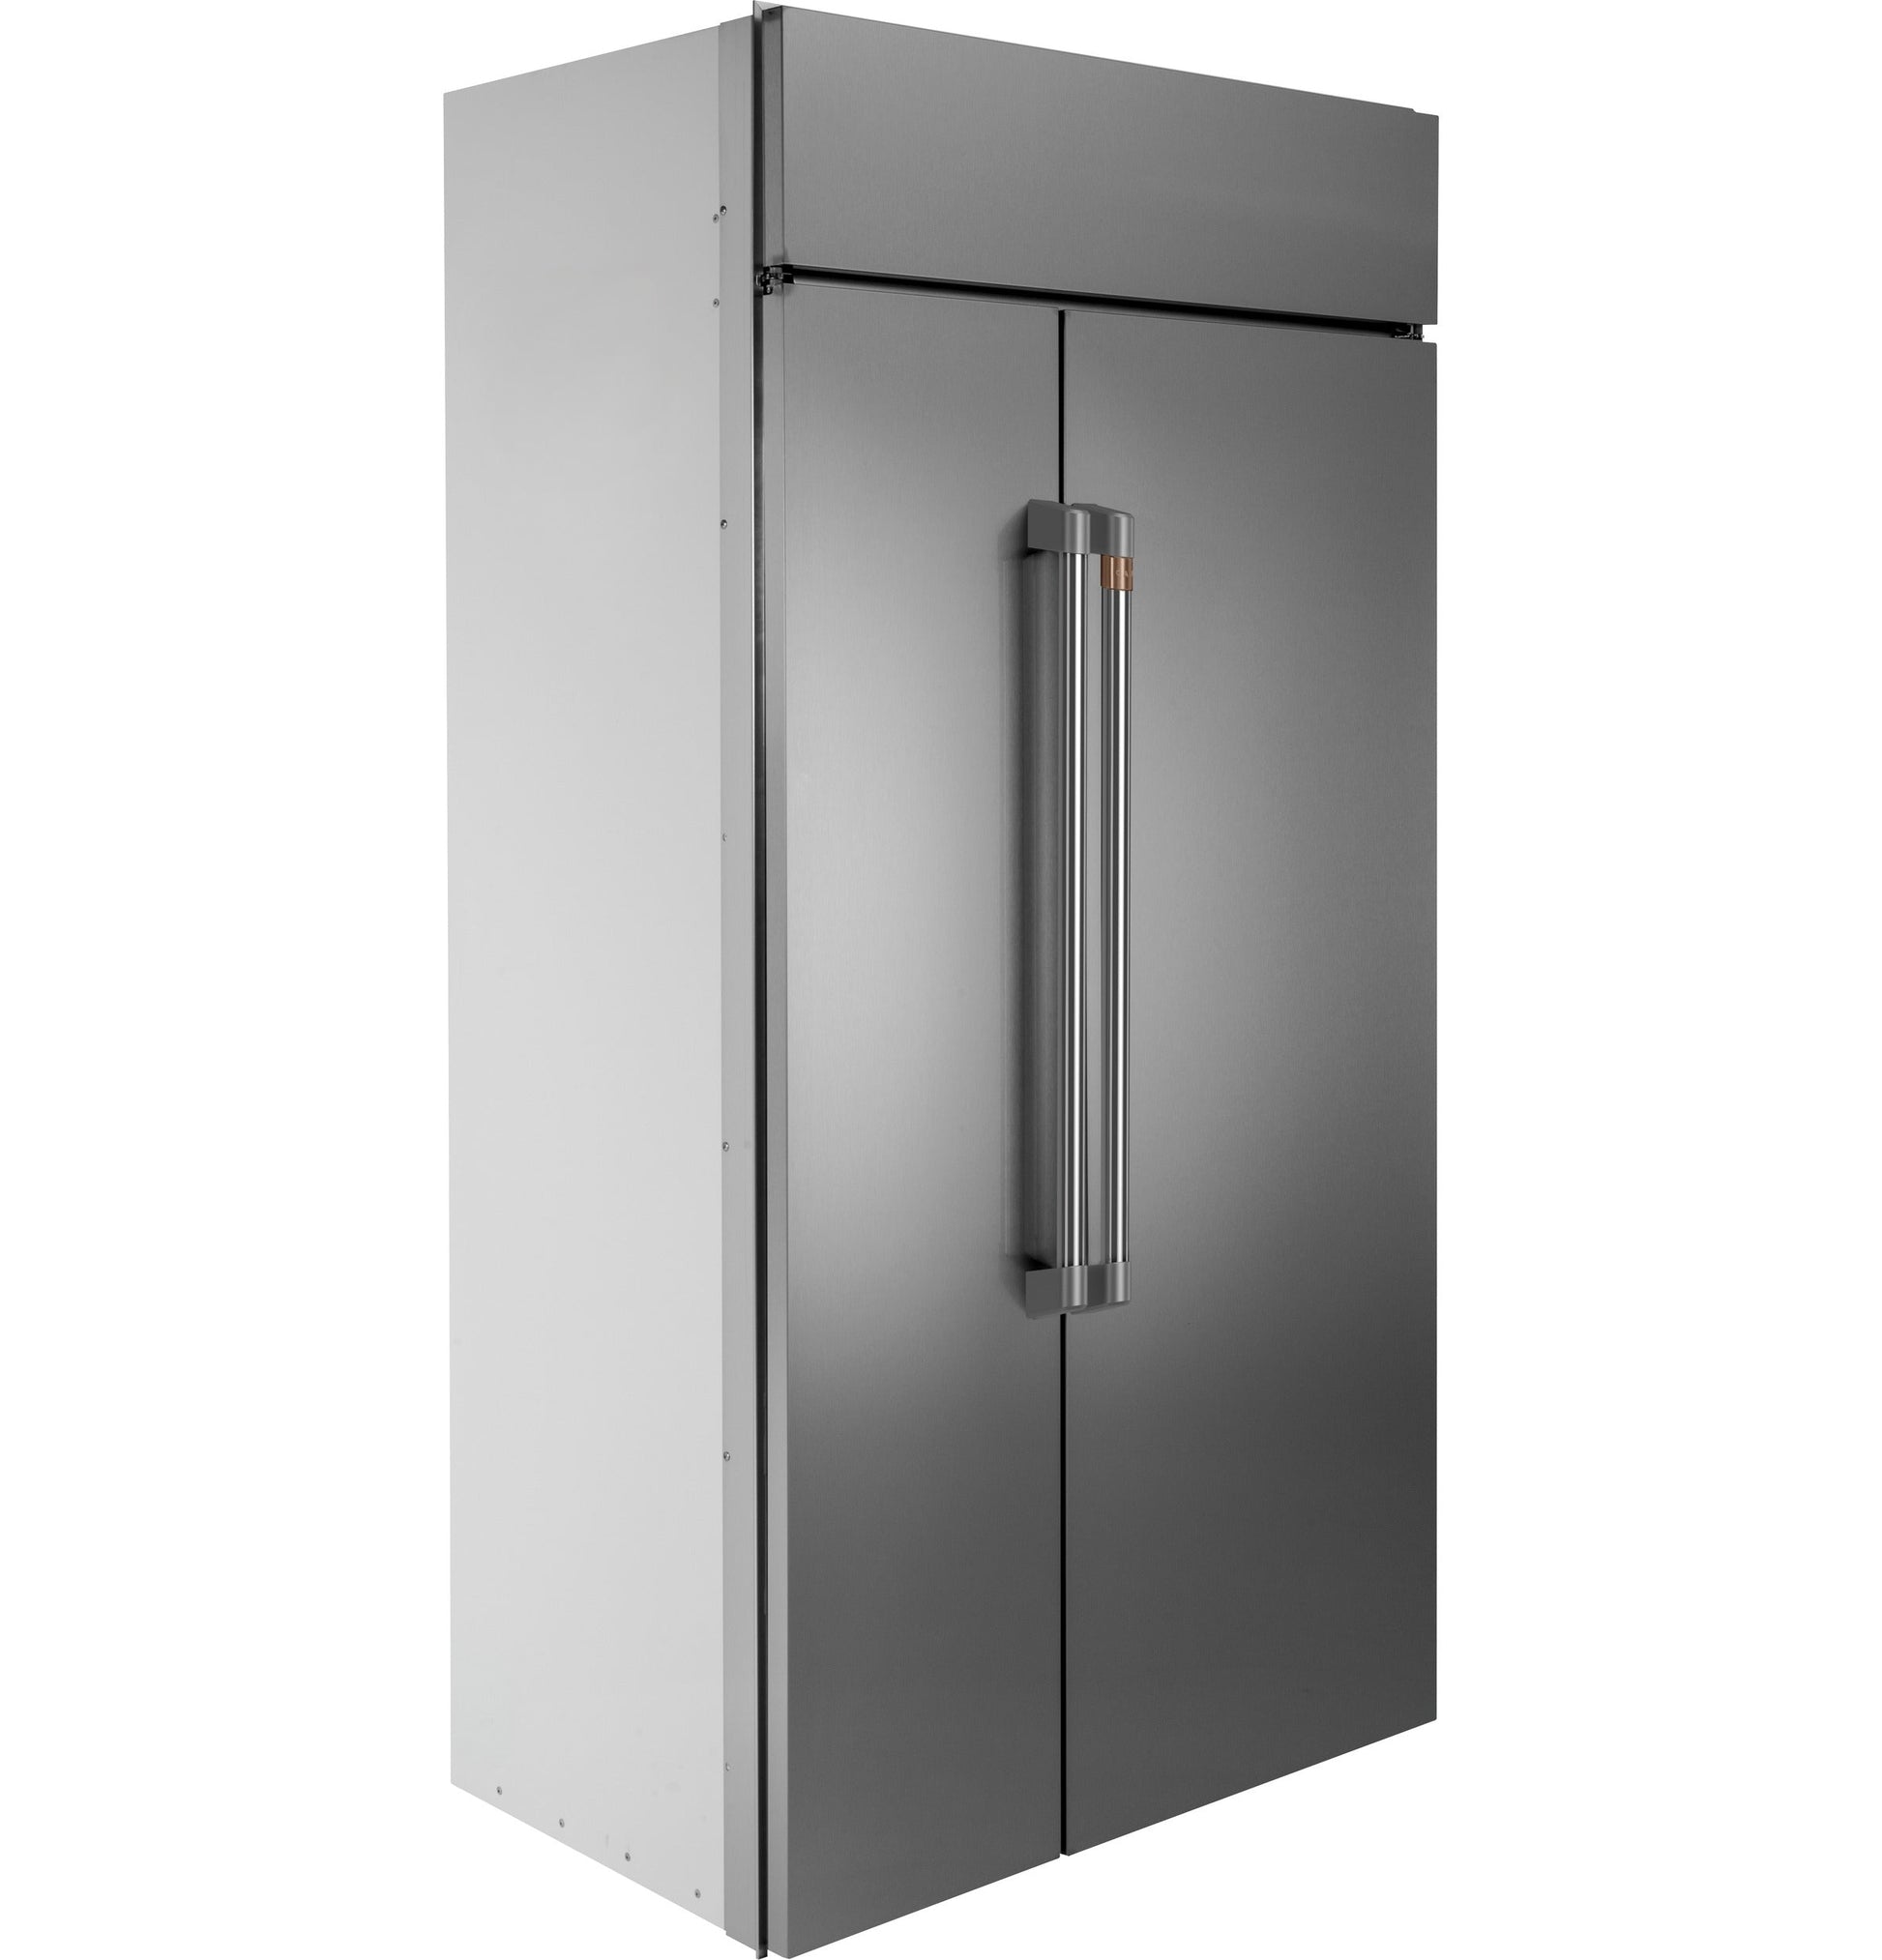 Café 42" Built-In Side-by-Side Refrigerator Stainless Steel - CSB42WP2NS1